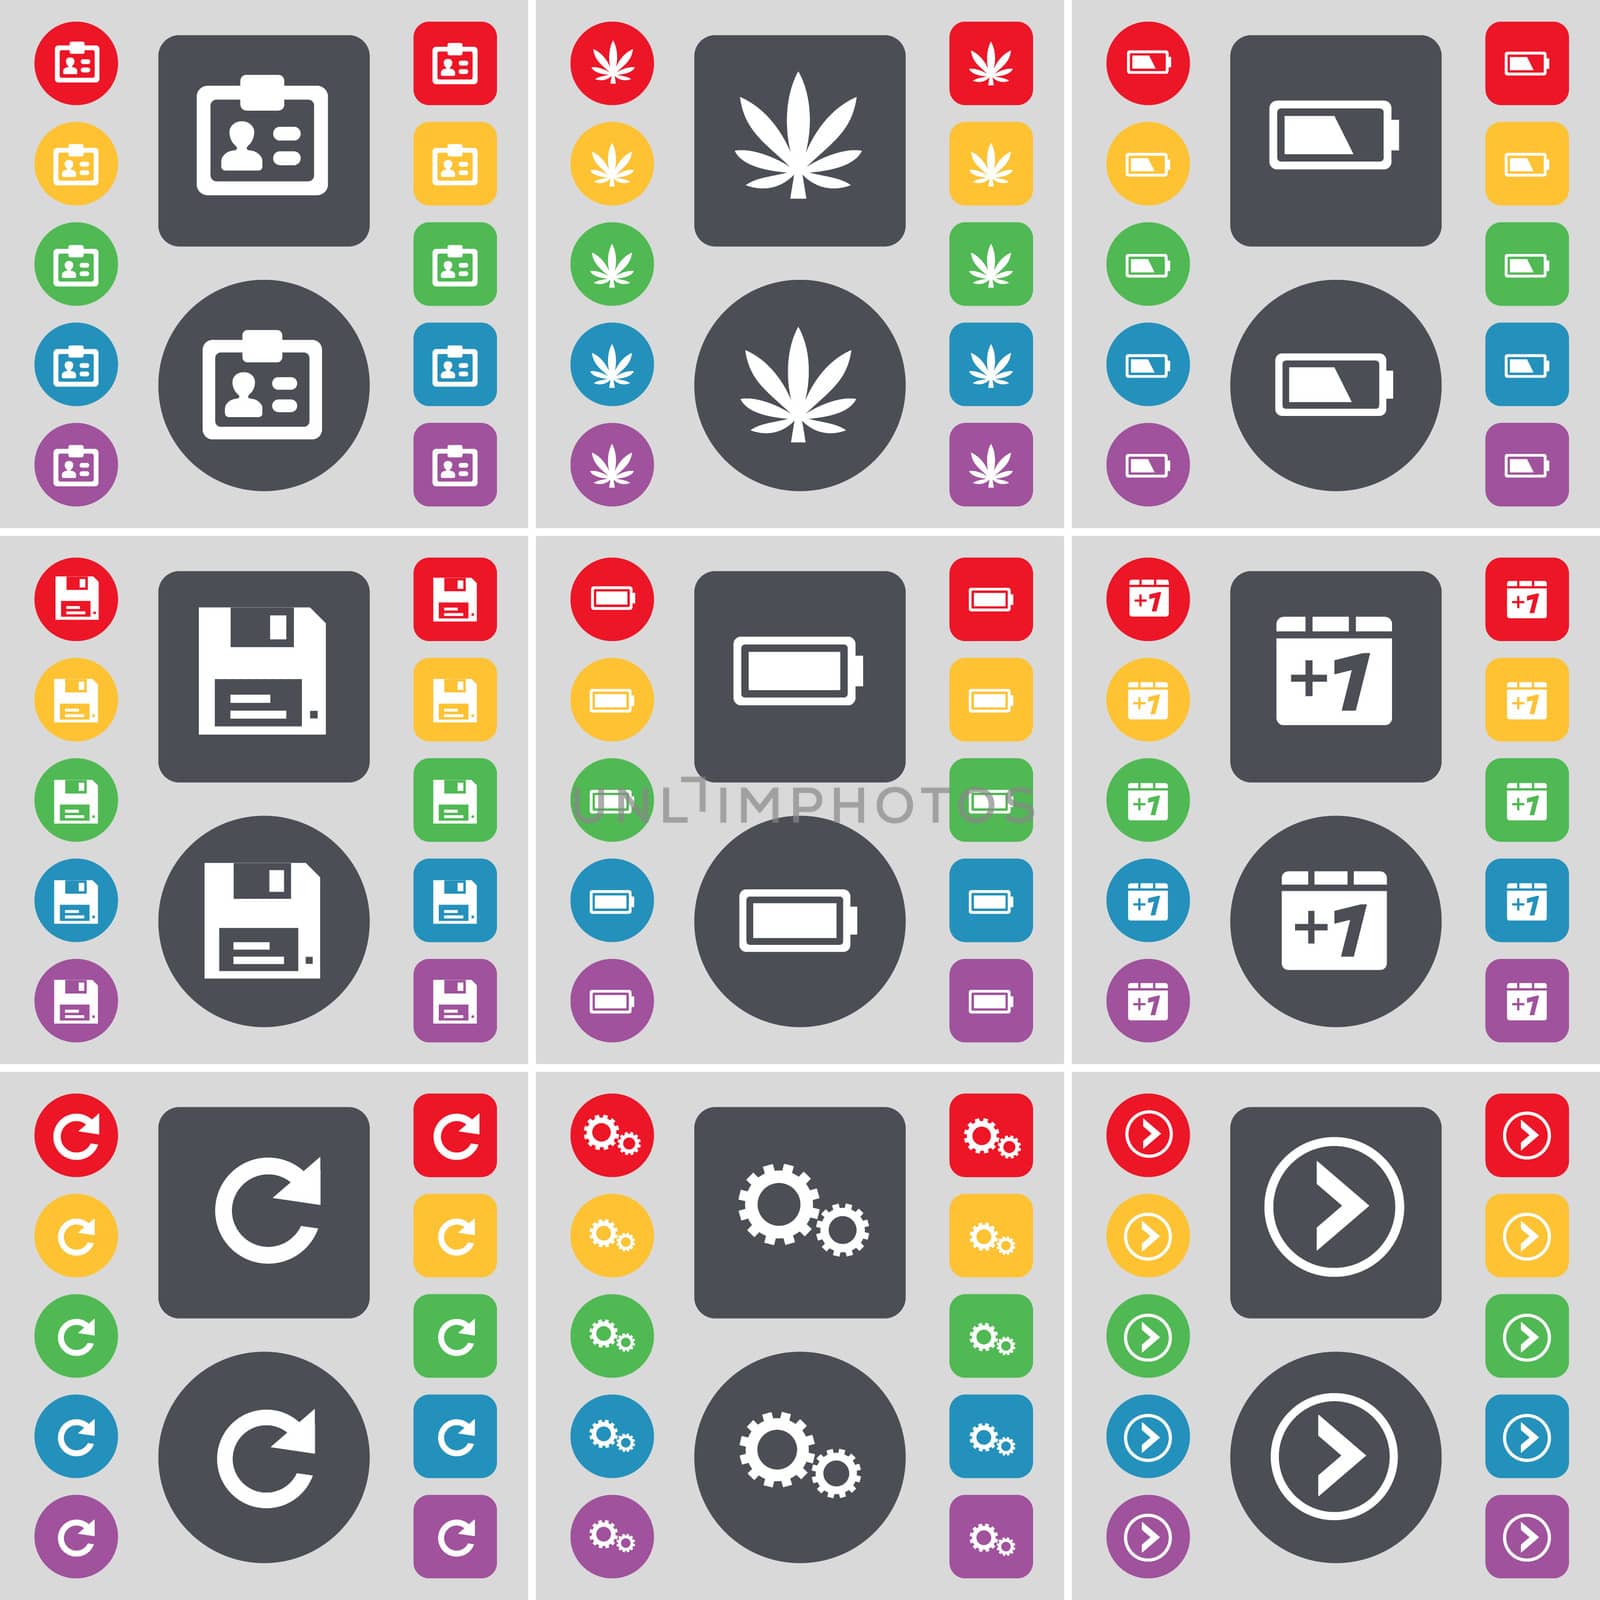 Contact, Marijuana, Battery, Floppy, Battery, Plus one, Reload, Arrow right icon symbol. A large set of flat, colored buttons for your design.  by serhii_lohvyniuk